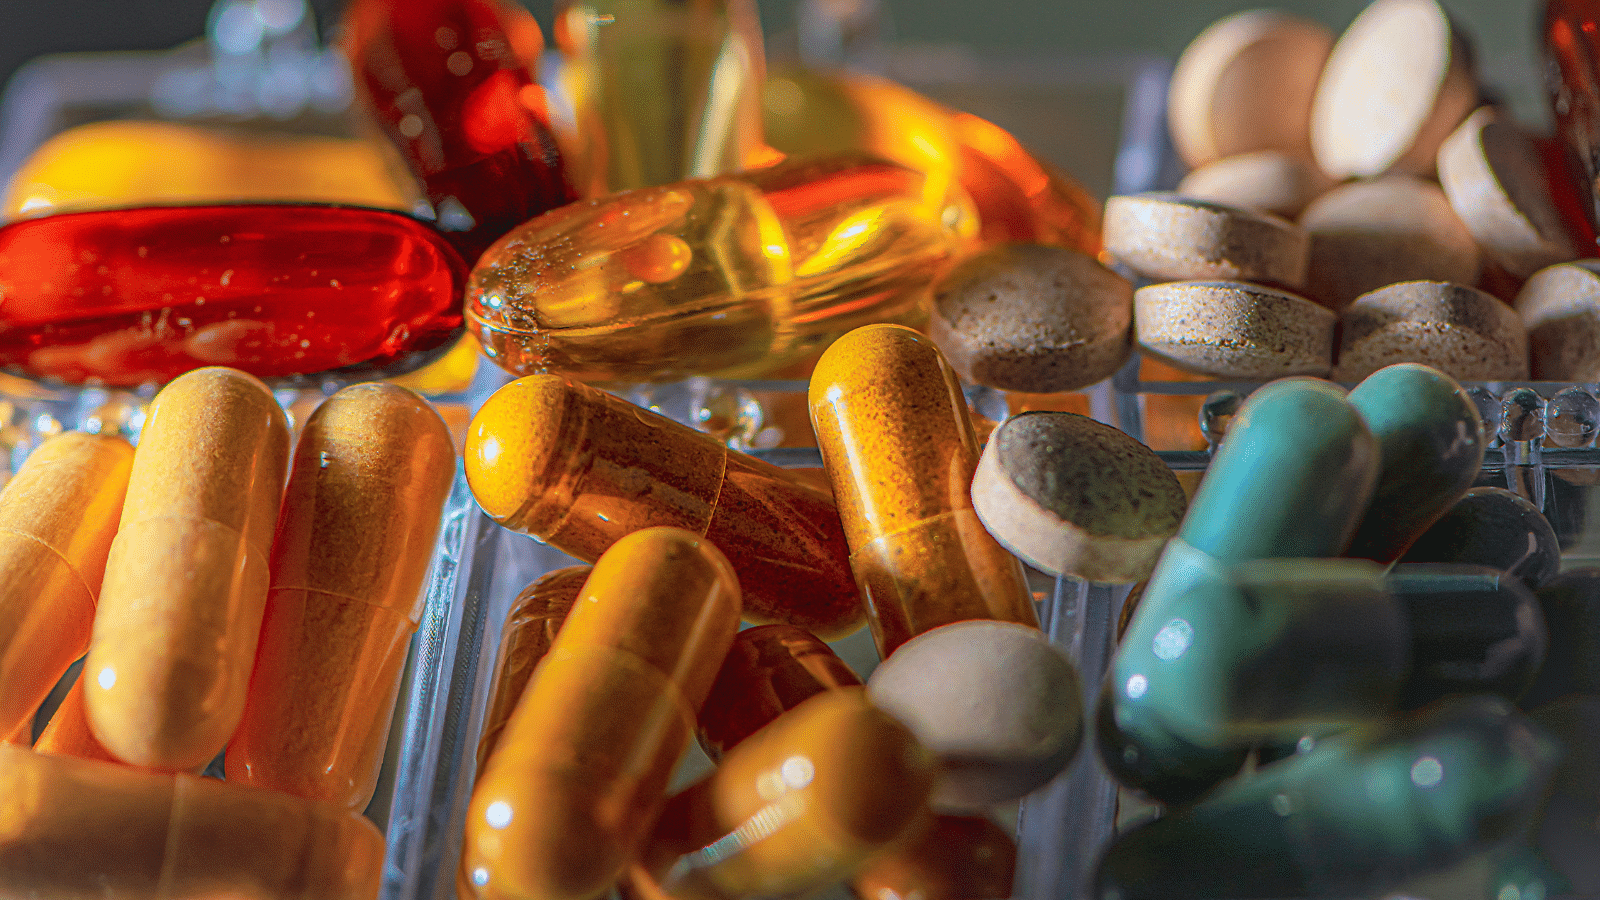 A pile of colourful pills.